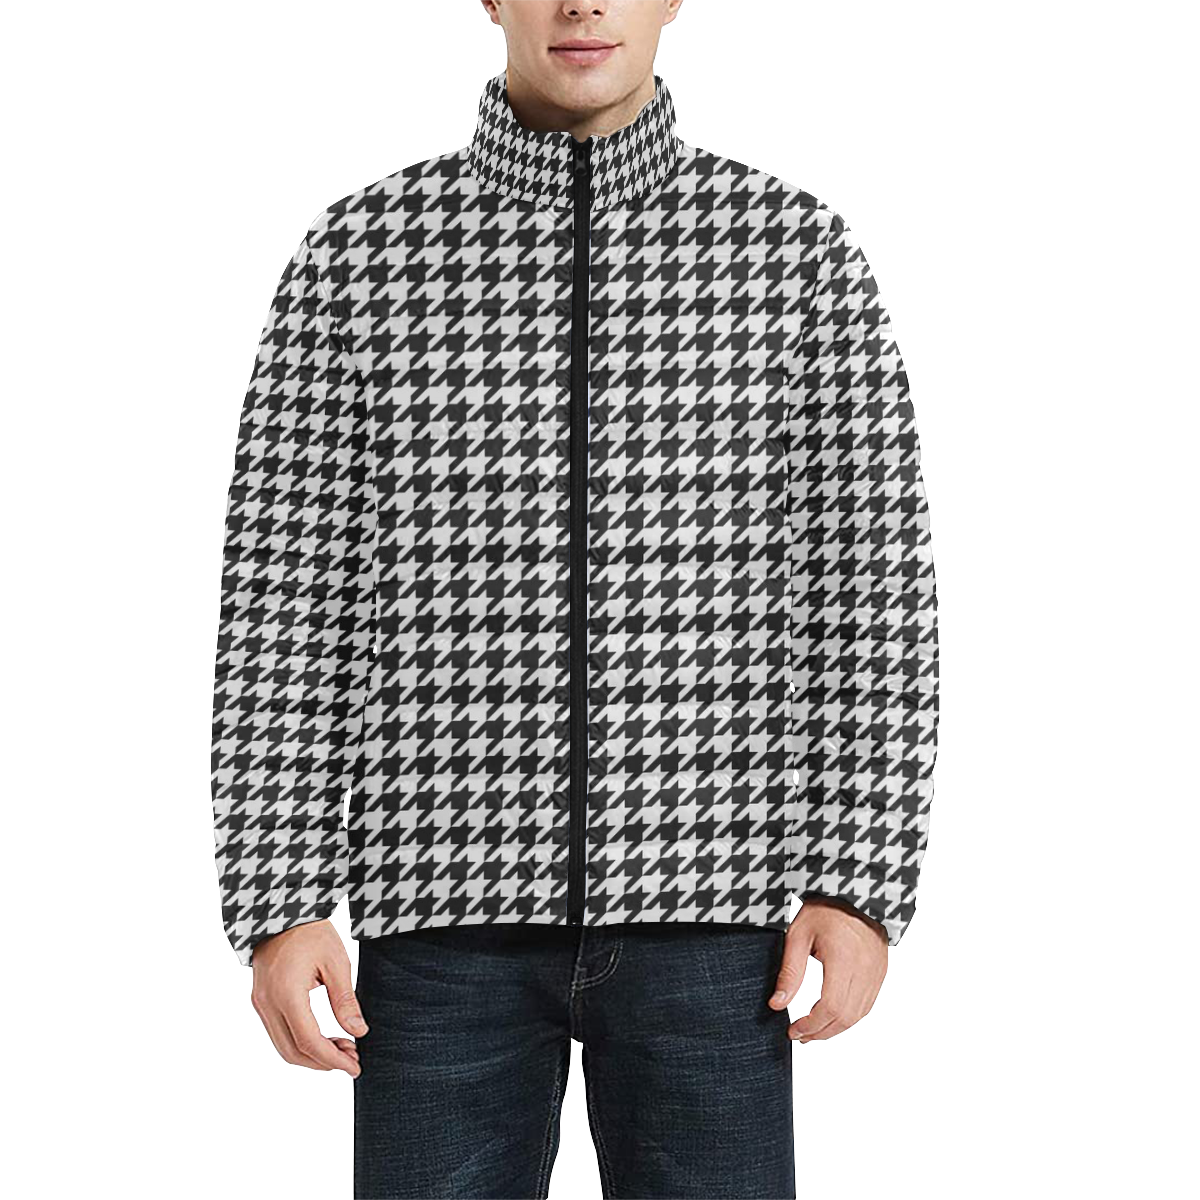 Friendly Houndstooth Pattern,black  by FeelGood Men's Stand Collar Padded Jacket (Model H41)